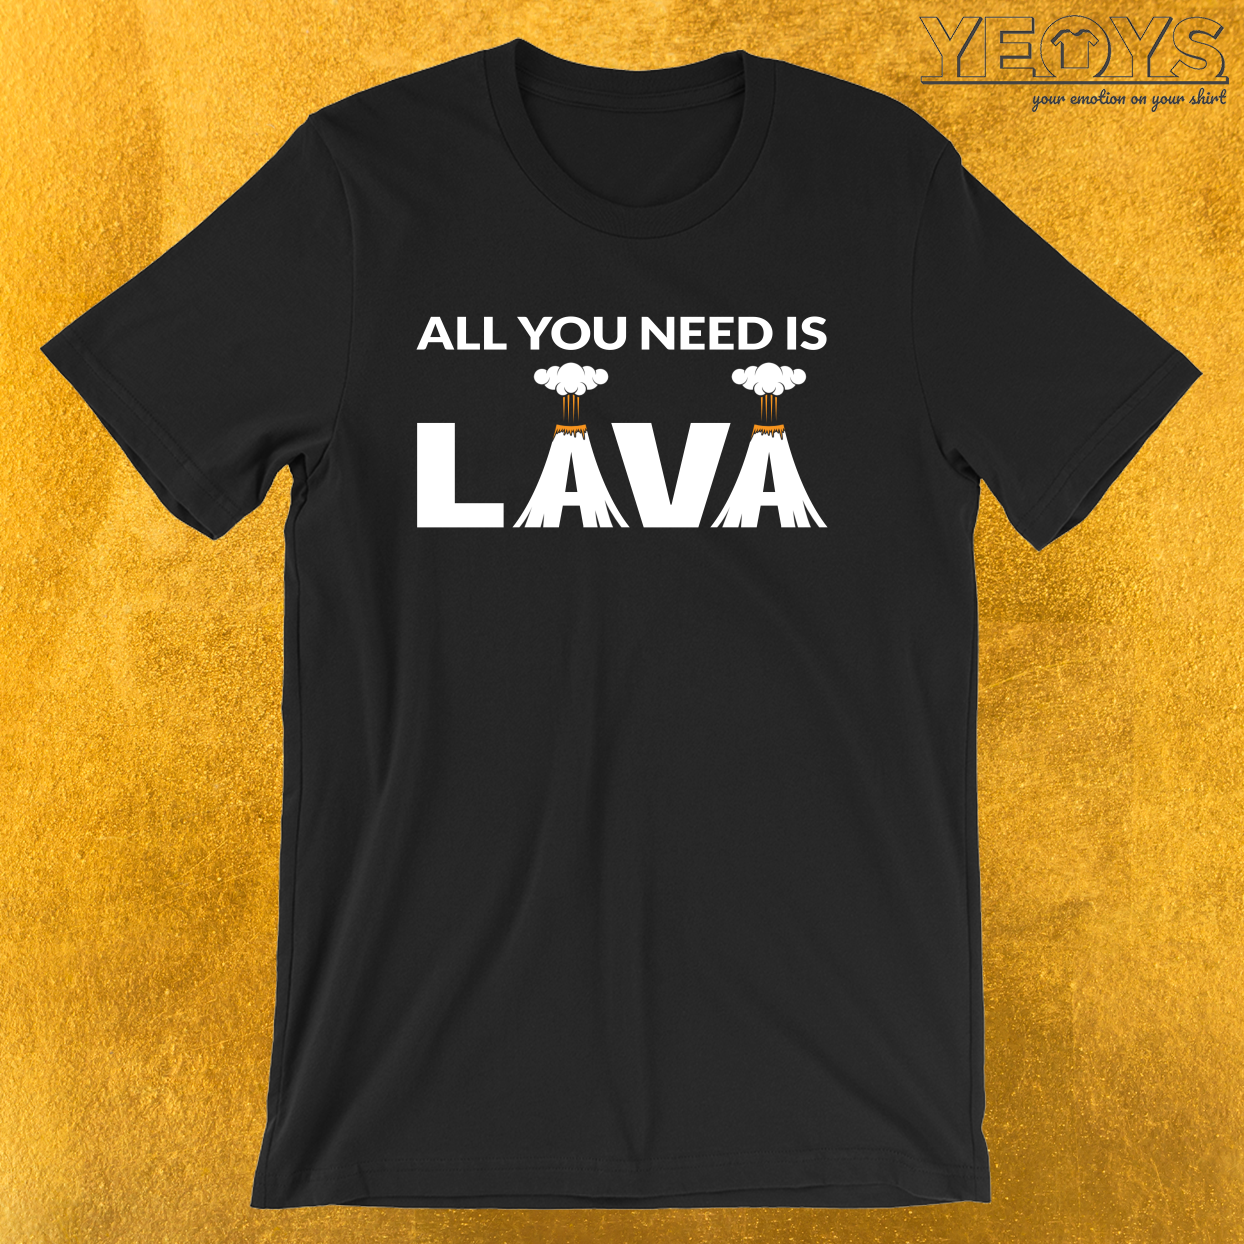 All You Need Is Lava – Funny Lava Volcano Tee